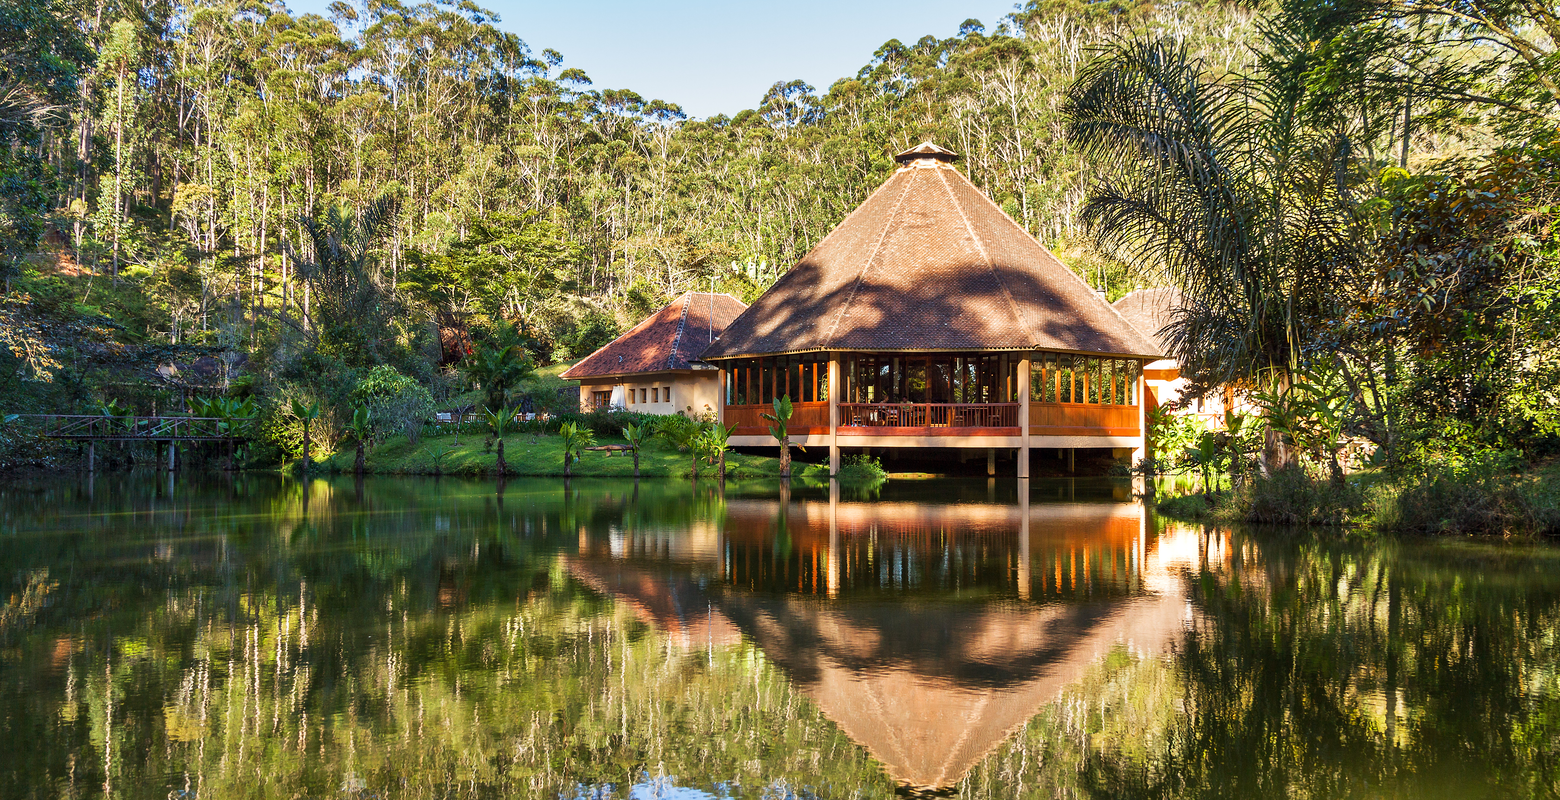 Andasibe Mantadia National Park lodge that sits above a lagoon and situated among the trees